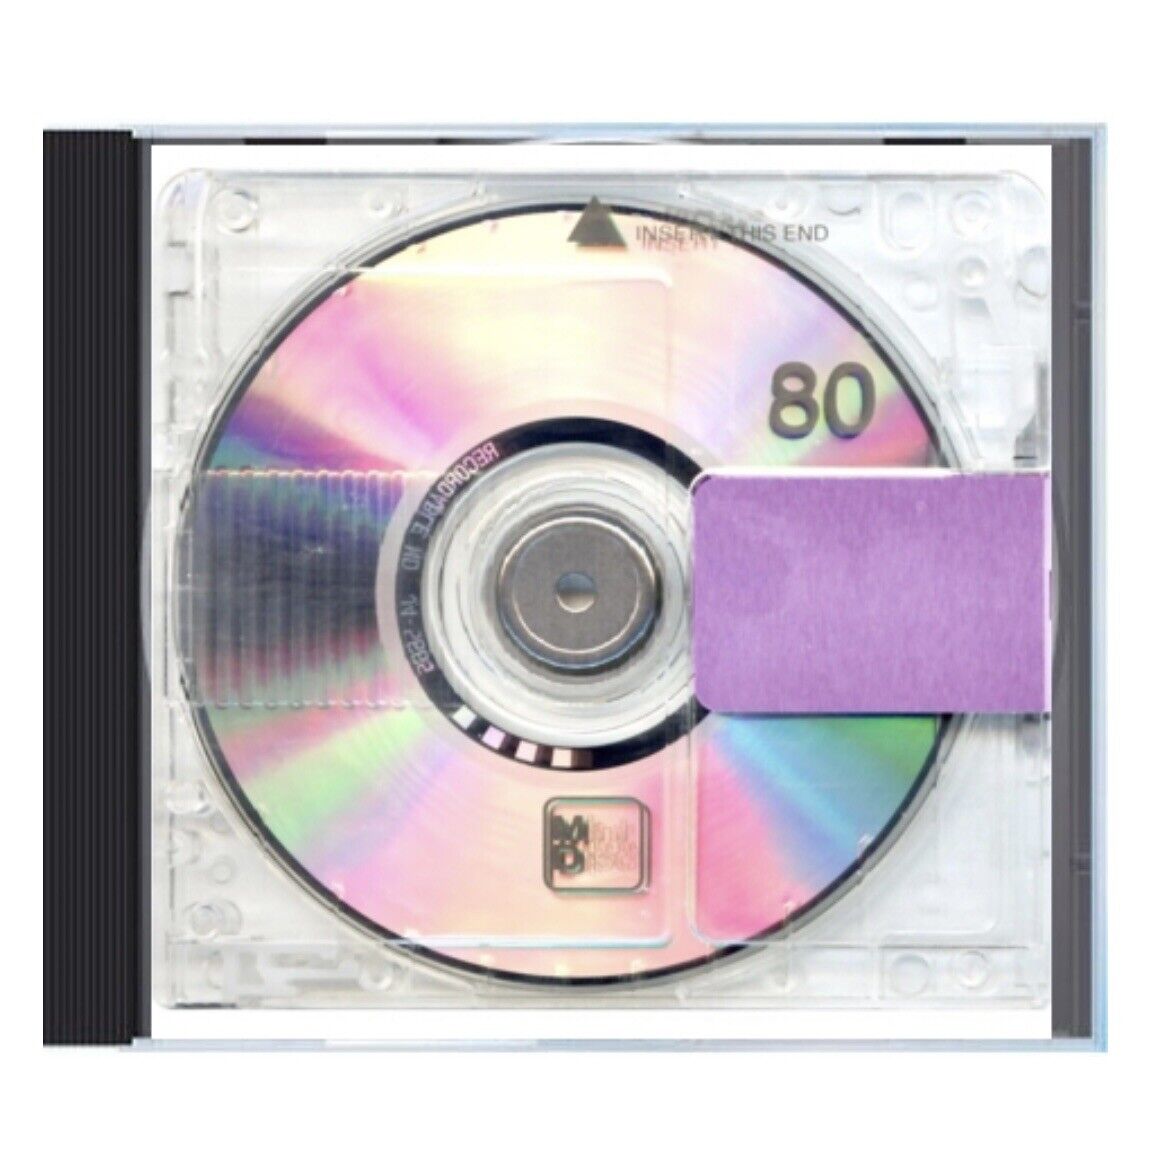 Kanye West - Yandhi Unofficial Updated CD Up To Date Tracks 2018/2019 New Body